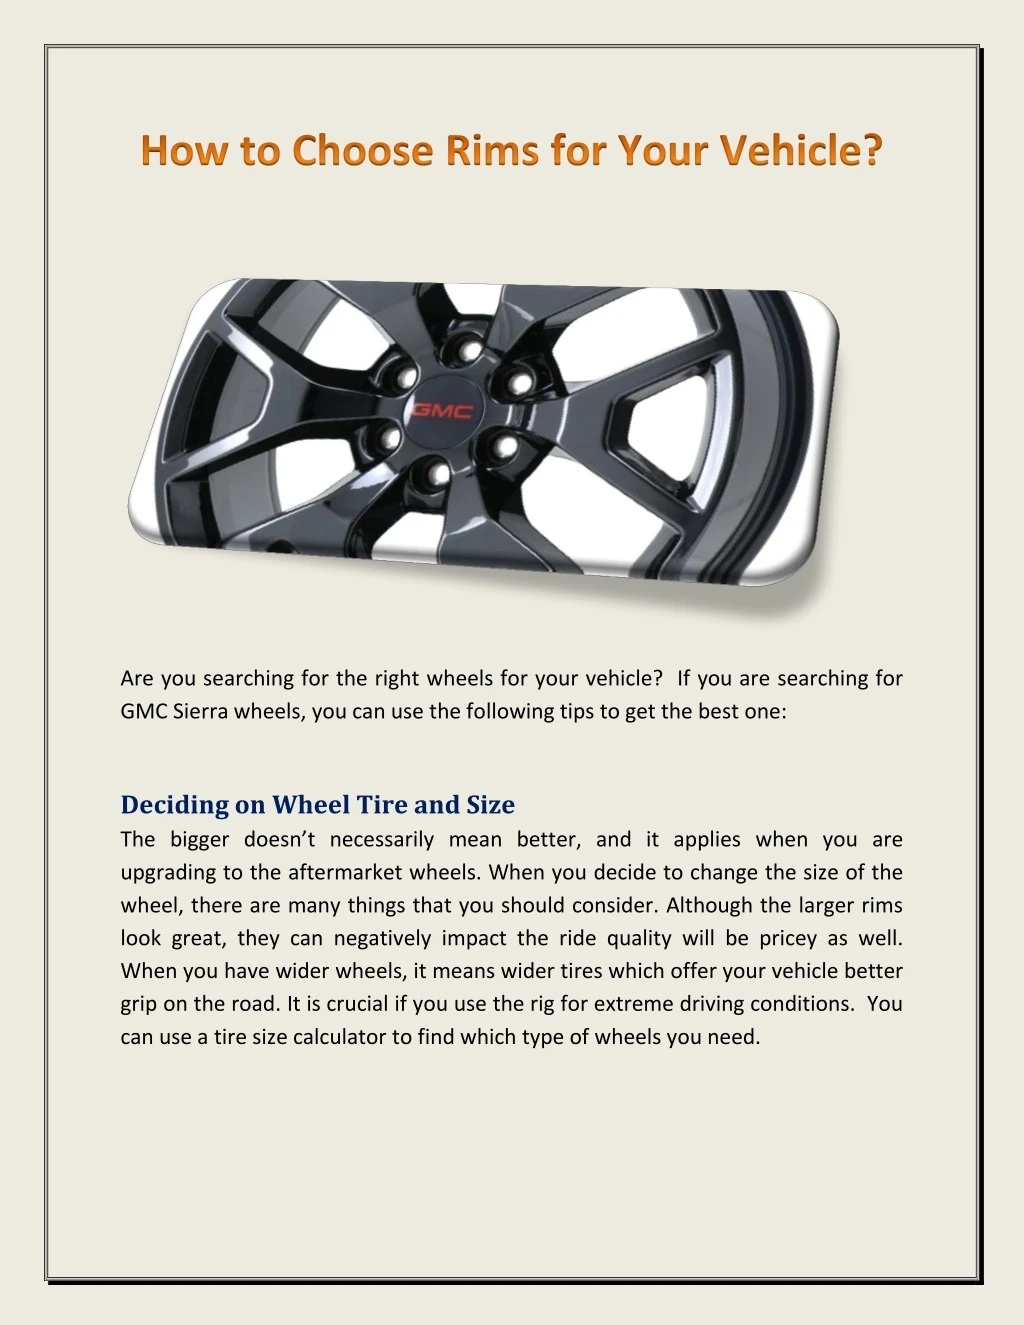 are you searching for the right wheels for your